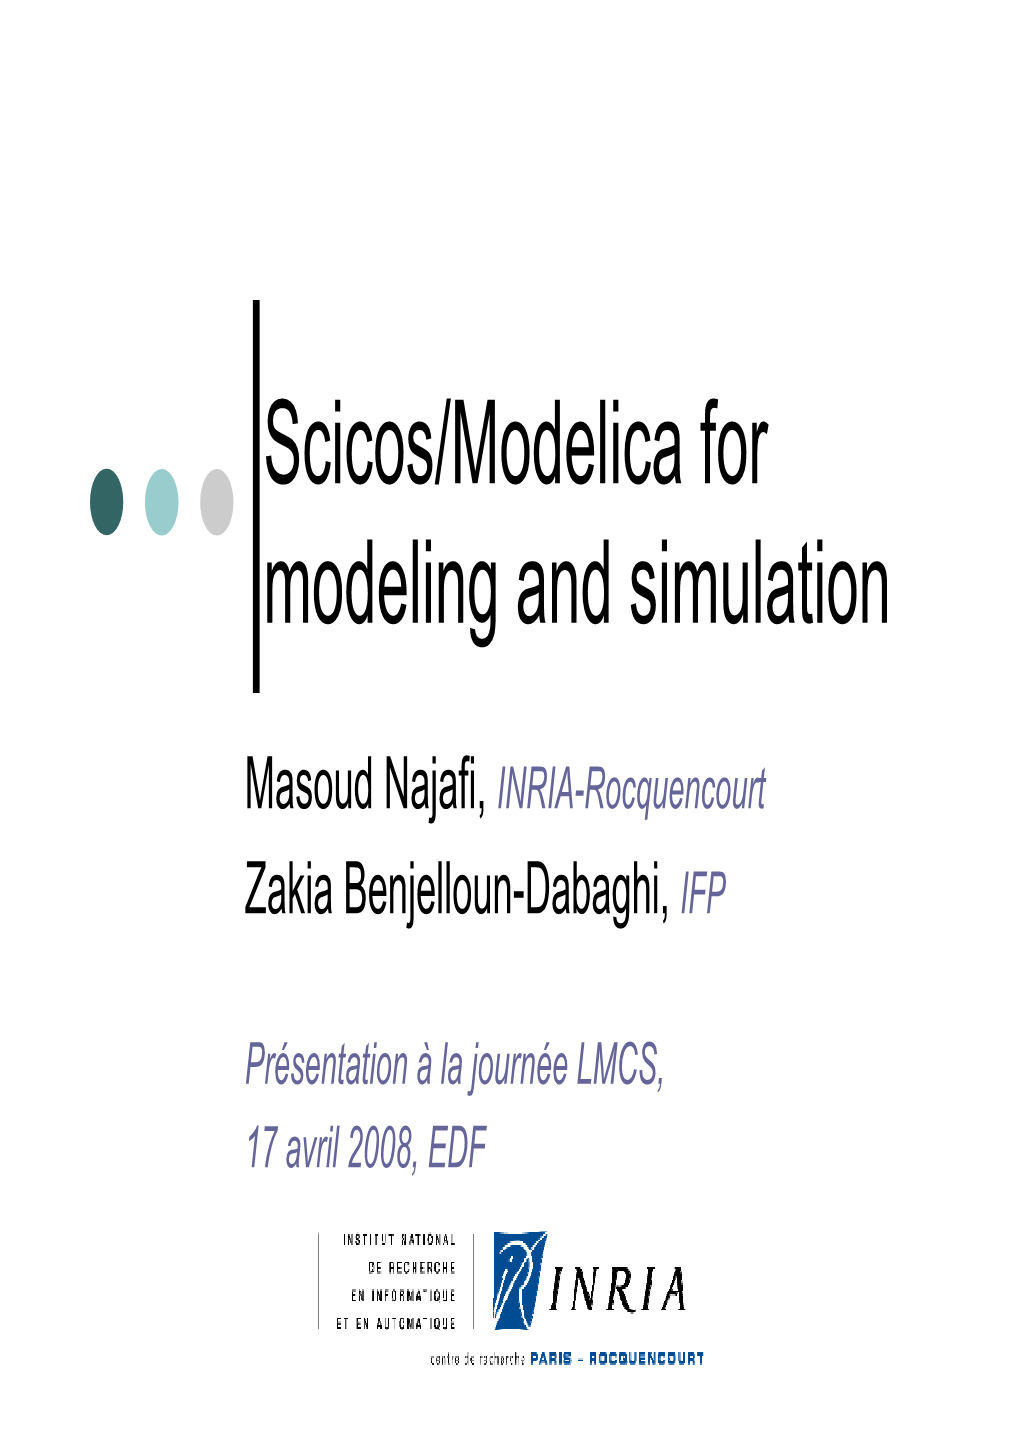 Scicos/Modelica for Modeling and Simulation